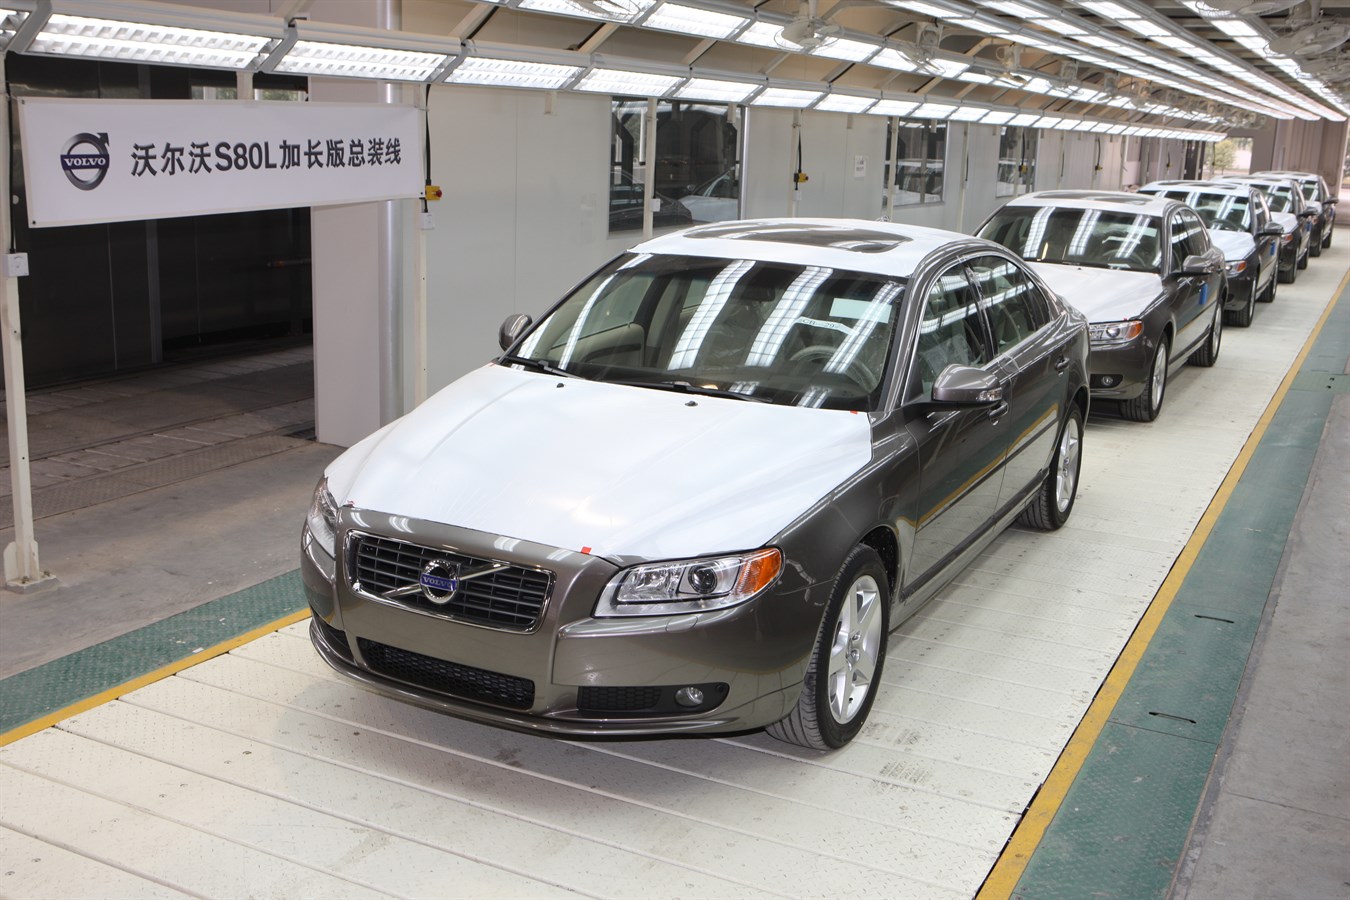 Volvo S80L - long wheel based car produced in China for the Chinese market